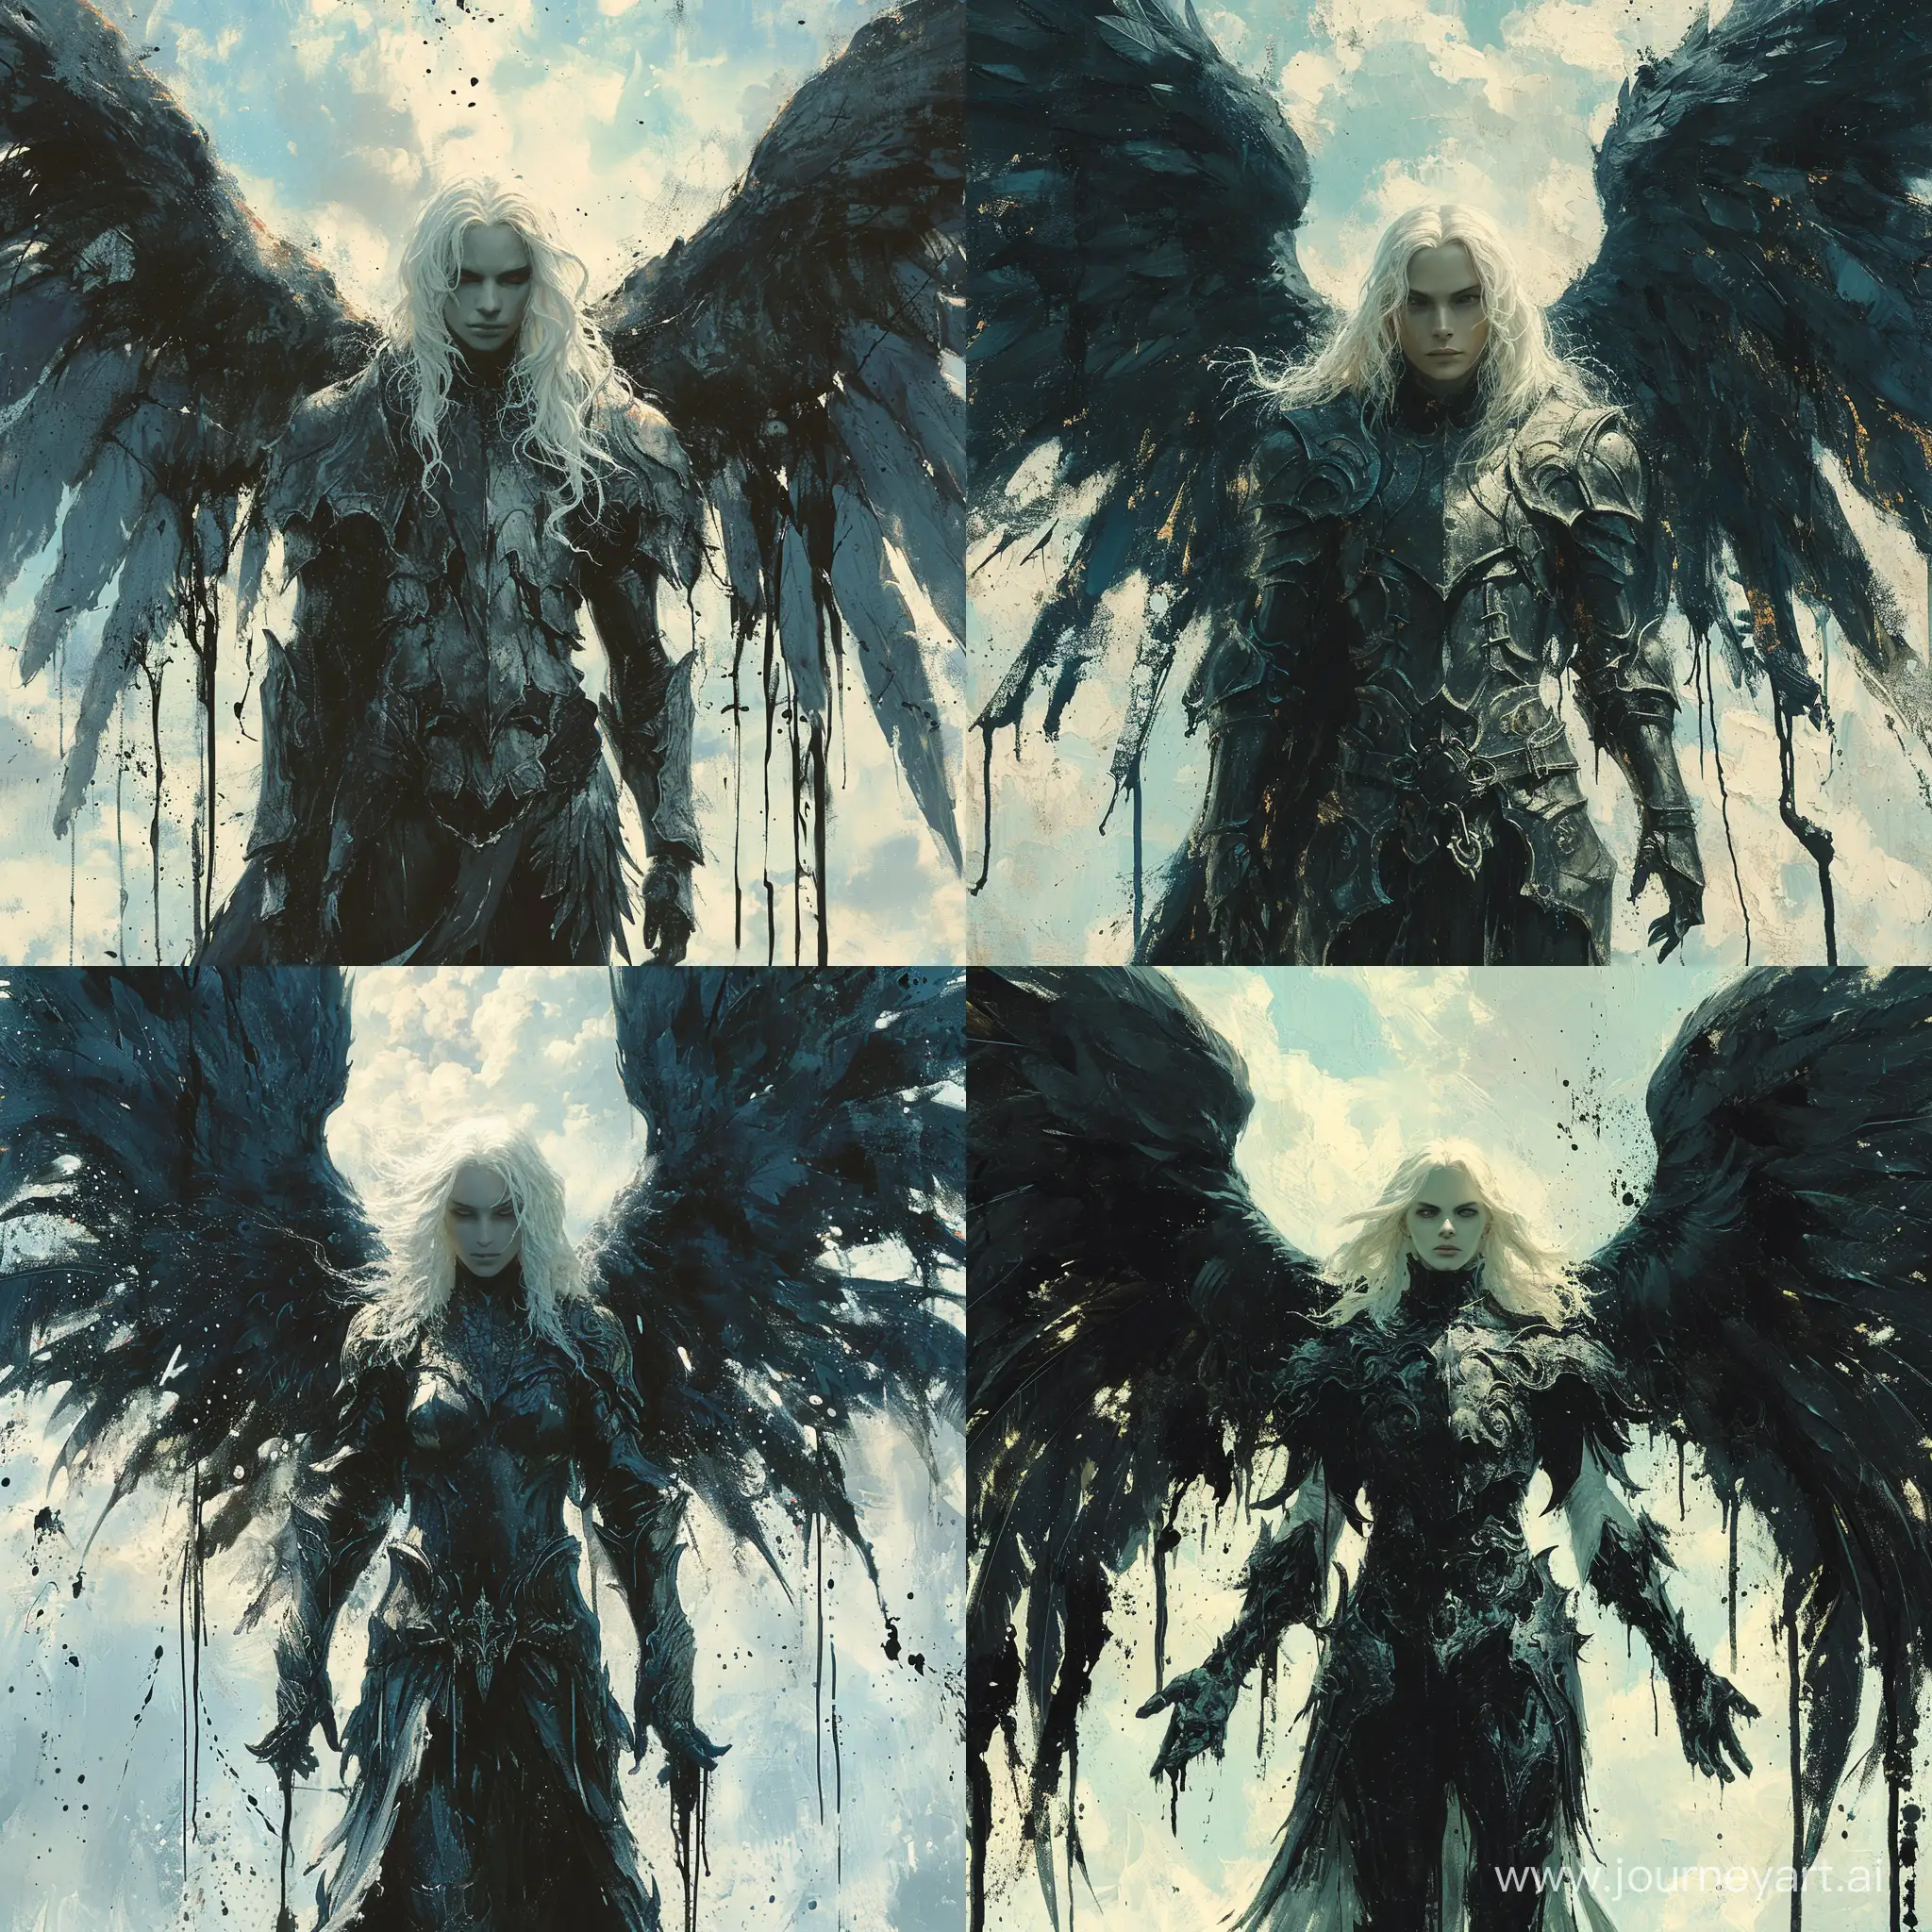 Intricate details, dark angel with large black wings, standing in front of a sky background with white and blue hues, the angel has white hair and is wearing a armor-like outfit, the wings are spread out and there are black paint drips trailing from them, --s 500